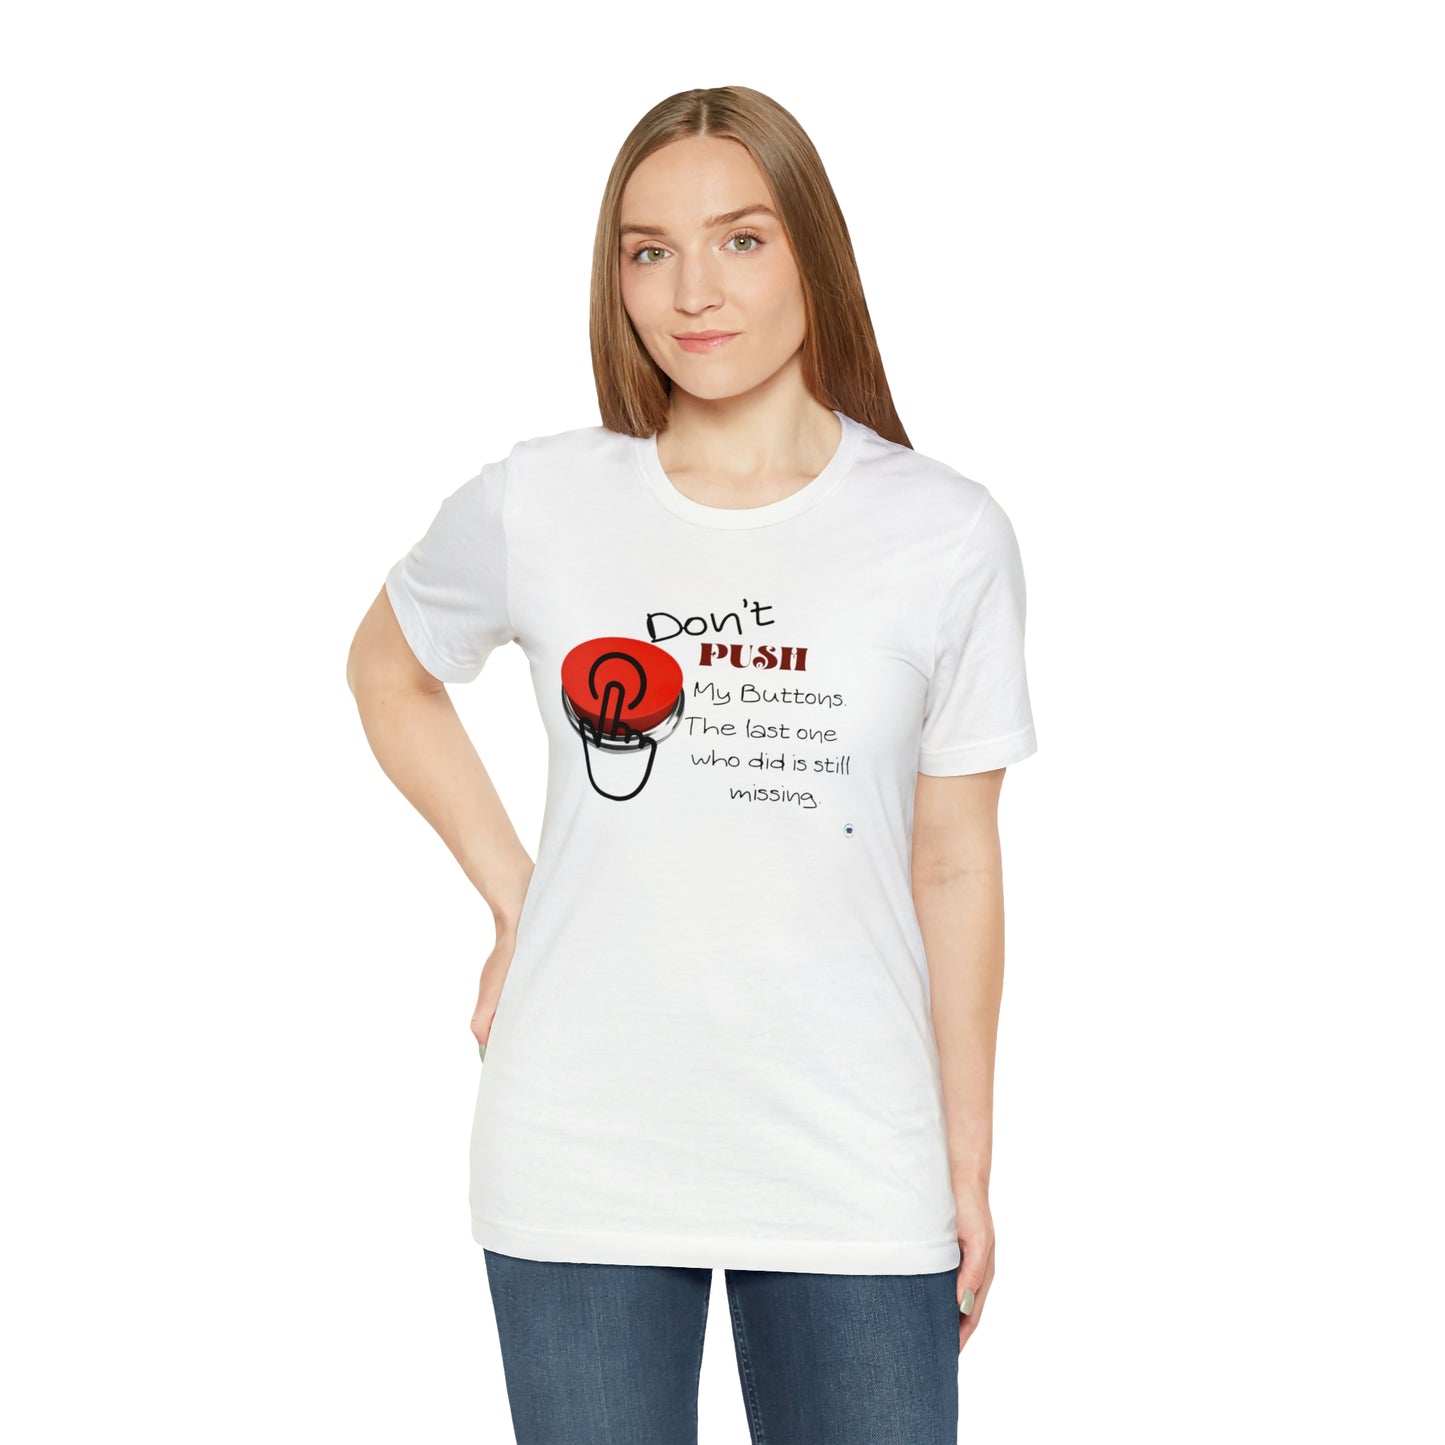 ‘Don’t PUSH my buttons. The last one who did is still missing’  Unisex Jersey Short Sleeve Tee